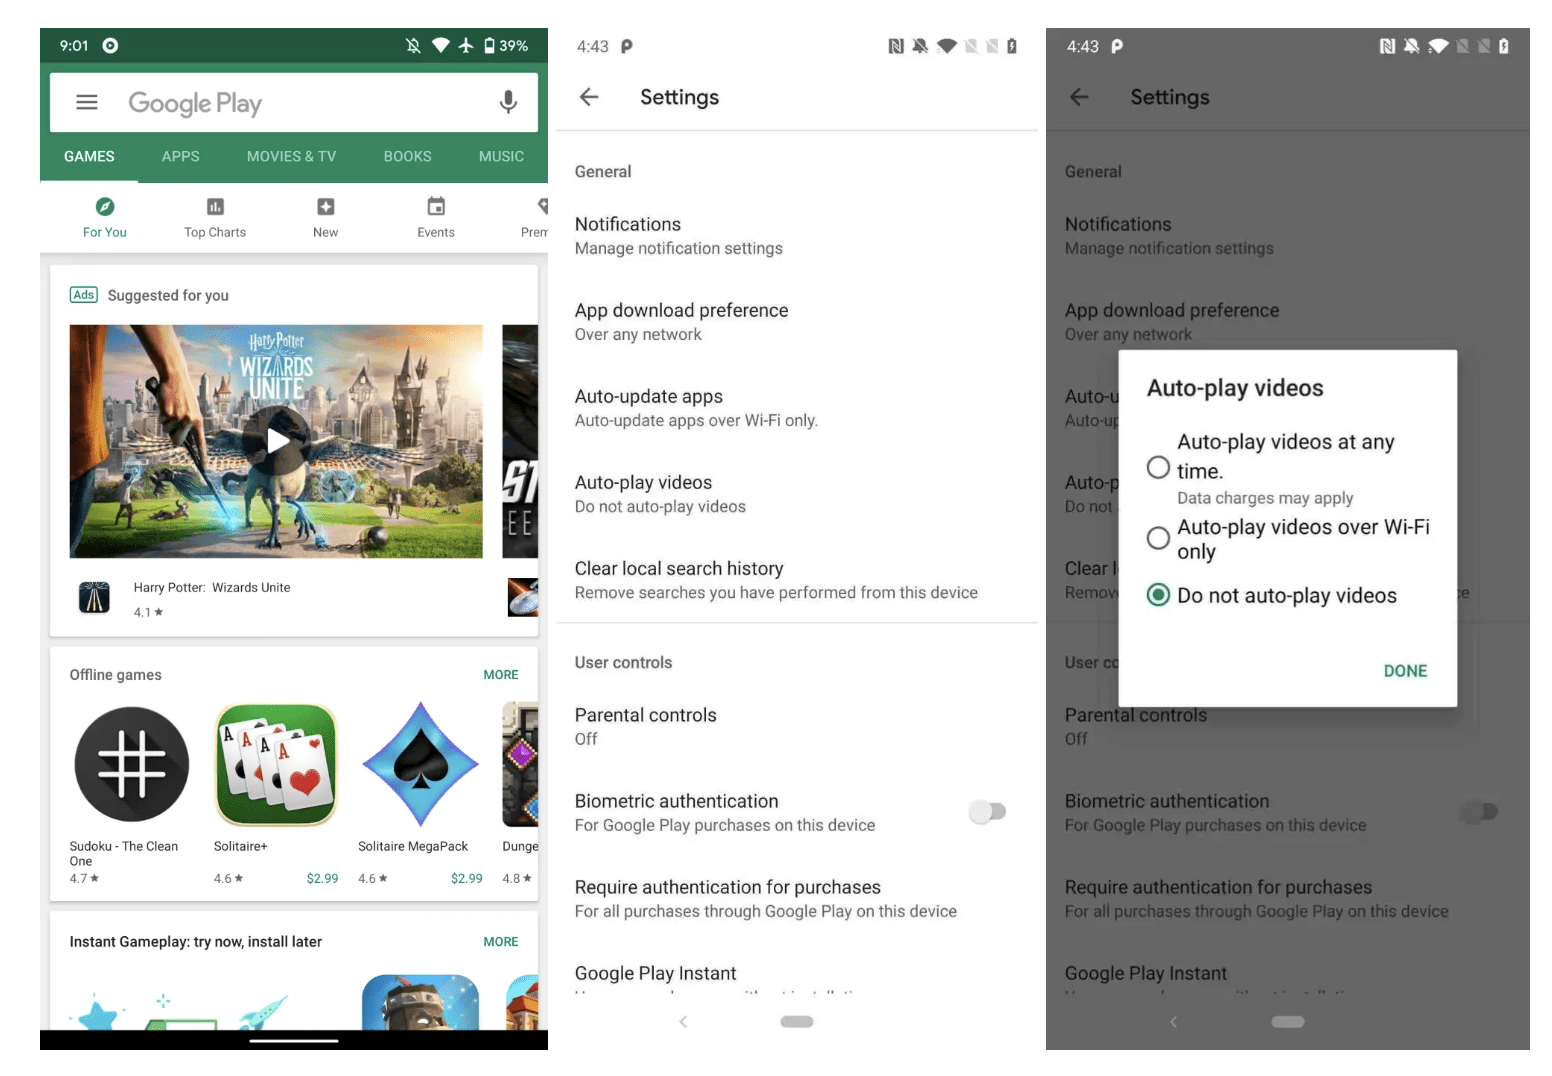 google play search and settings